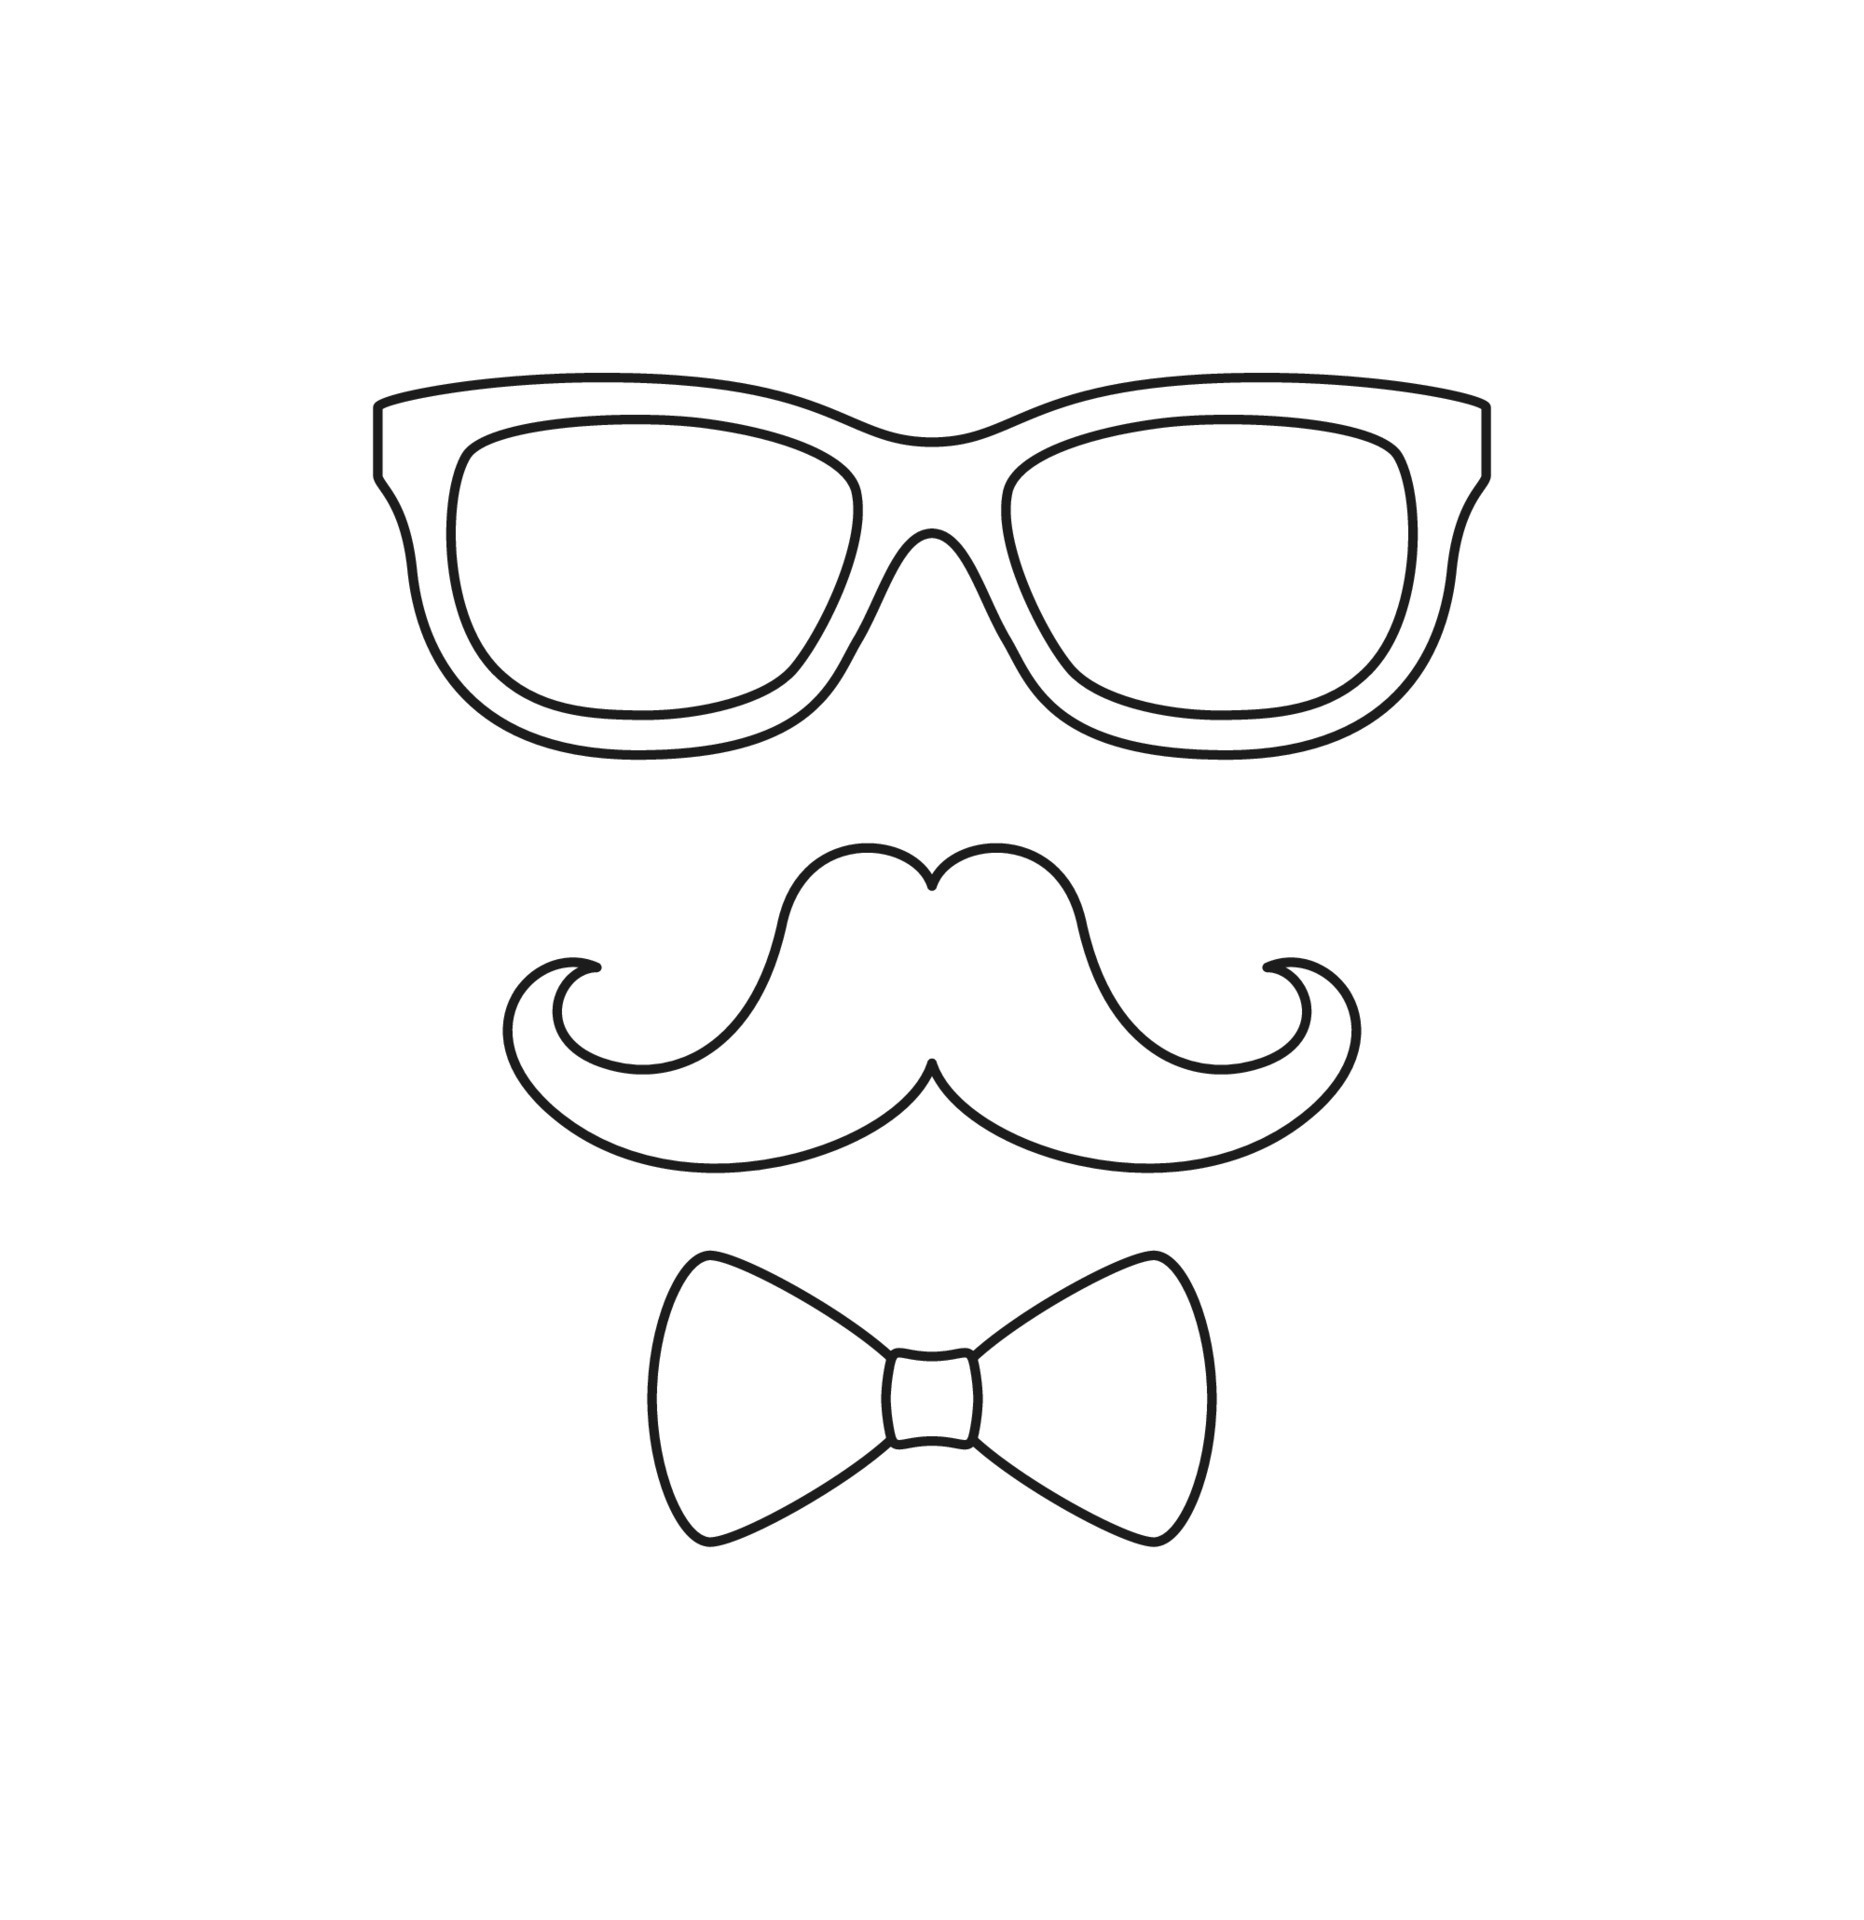 Coloring page with Mustache, Bow Tie, and Glasses for kids 9955394 Vector  Art at Vecteezy